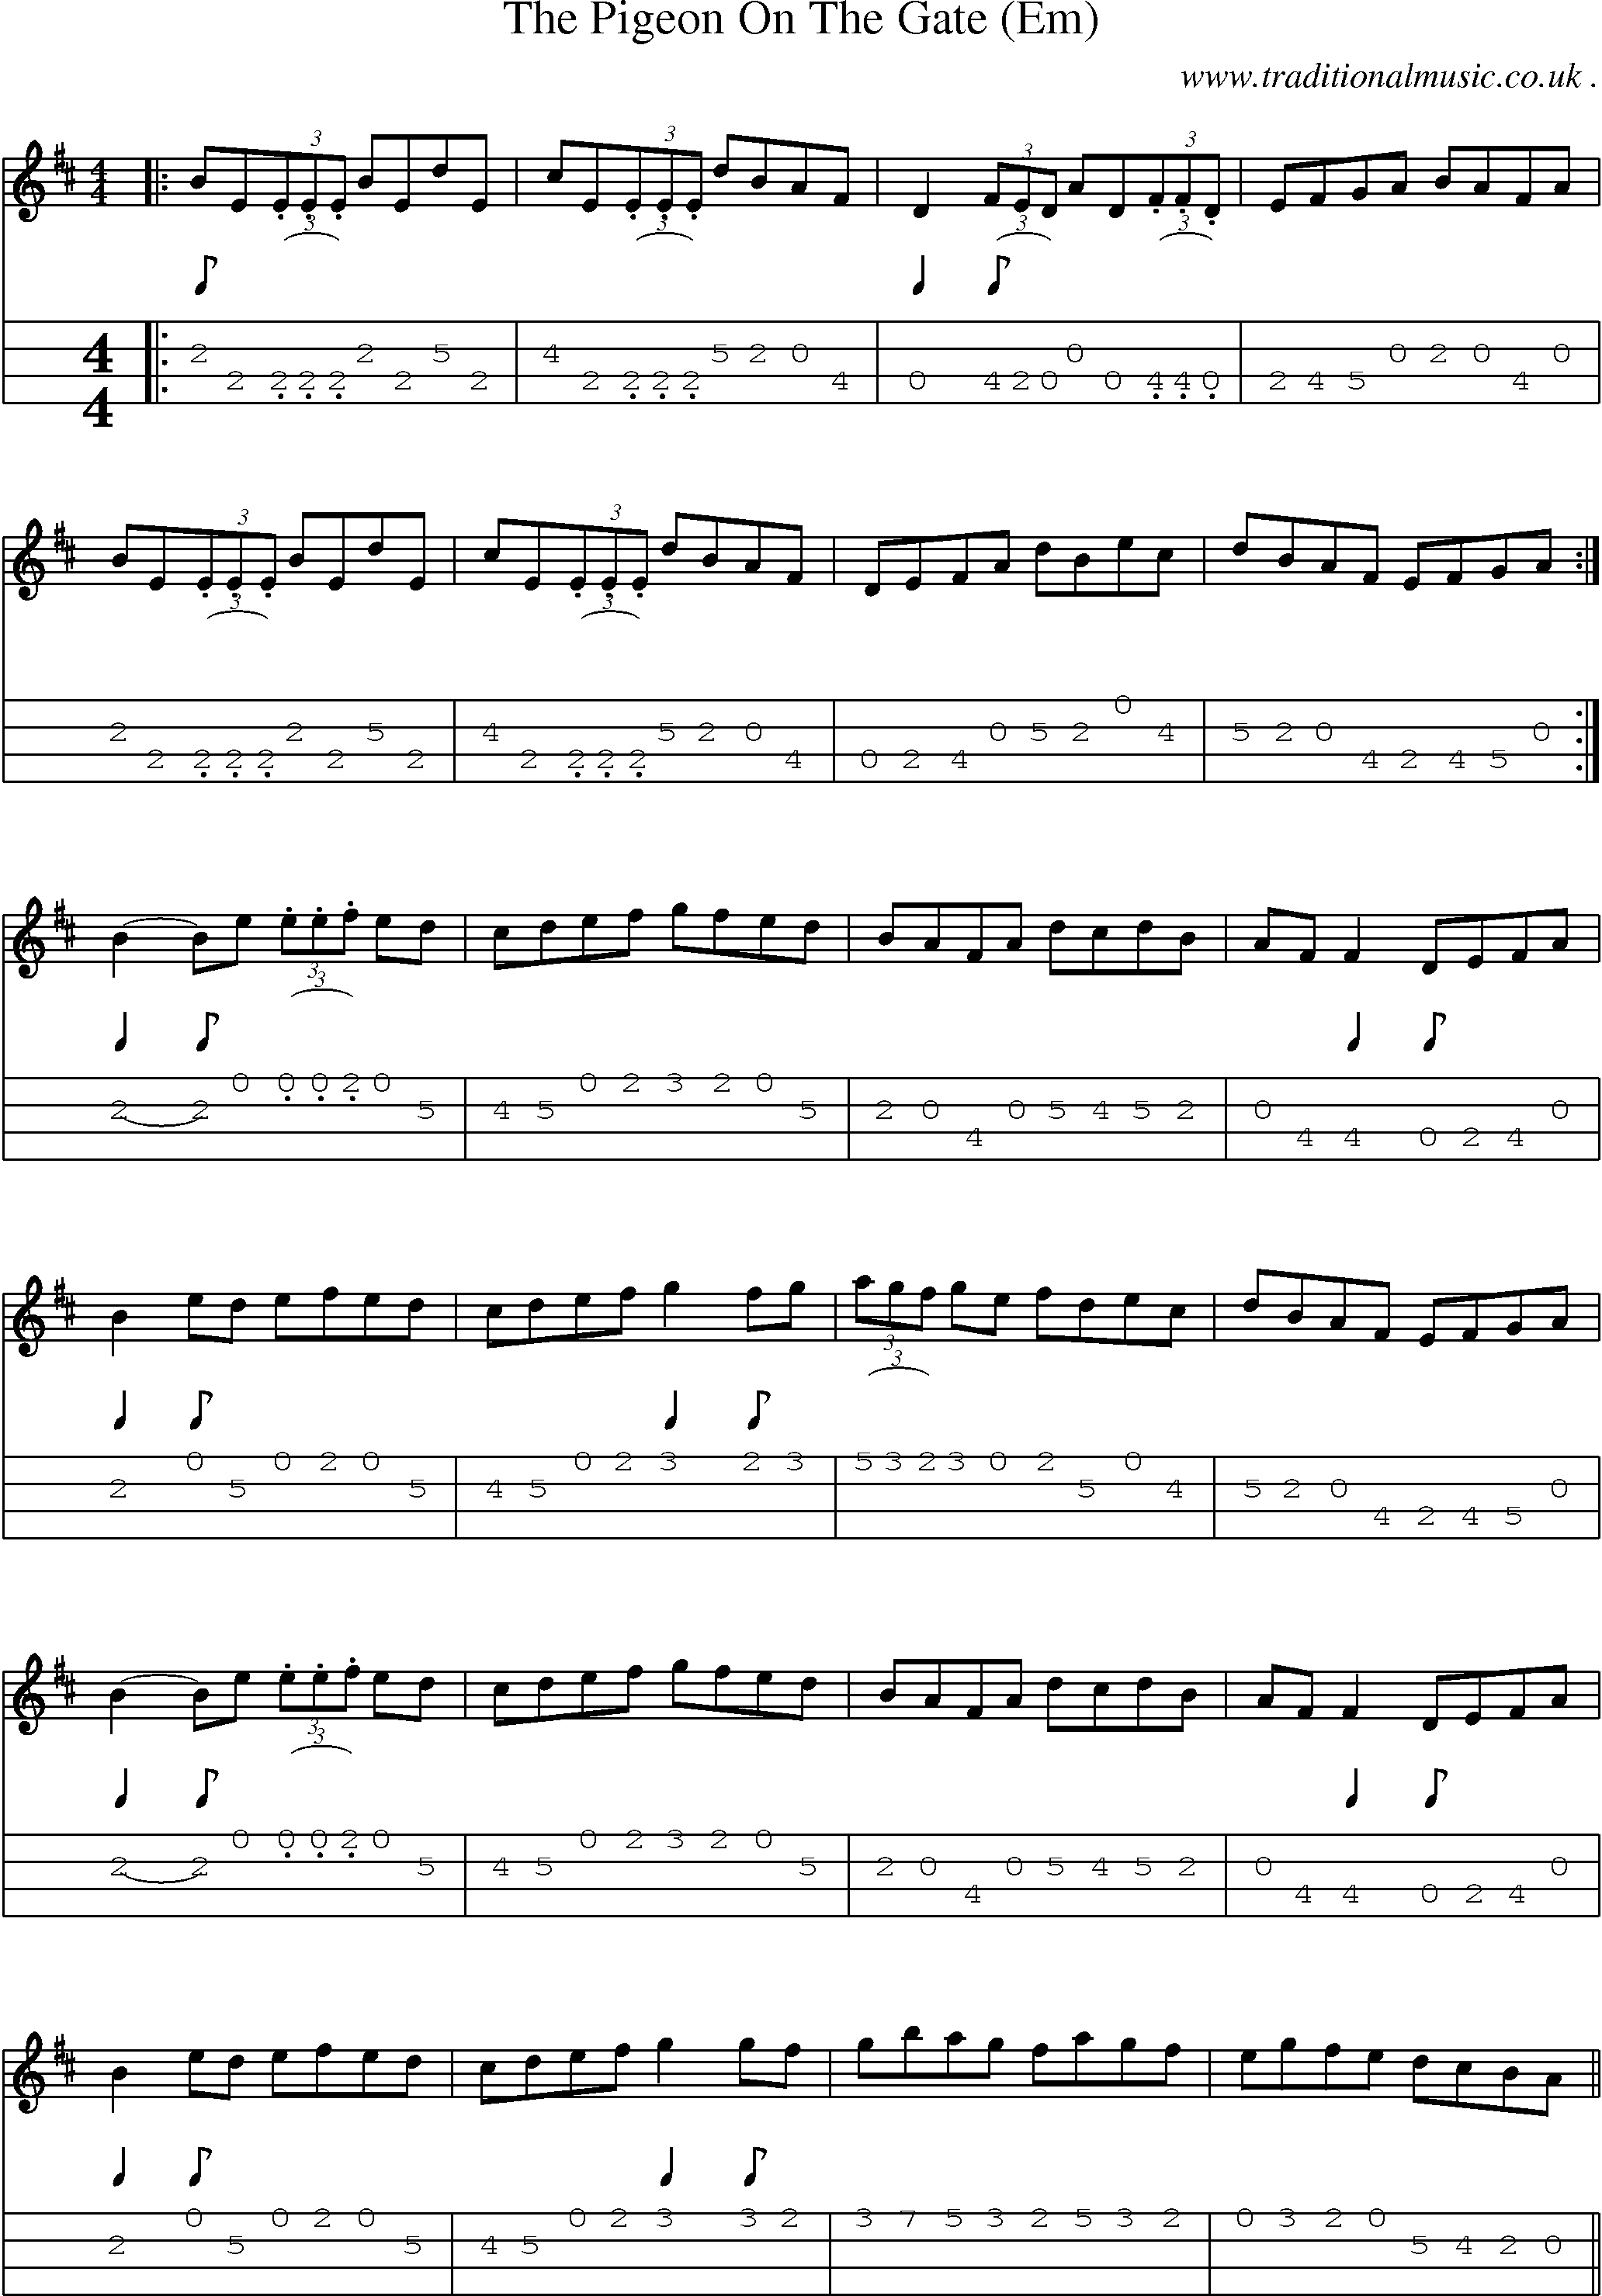 Sheet-Music and Mandolin Tabs for The Pigeon On The Gate (em)